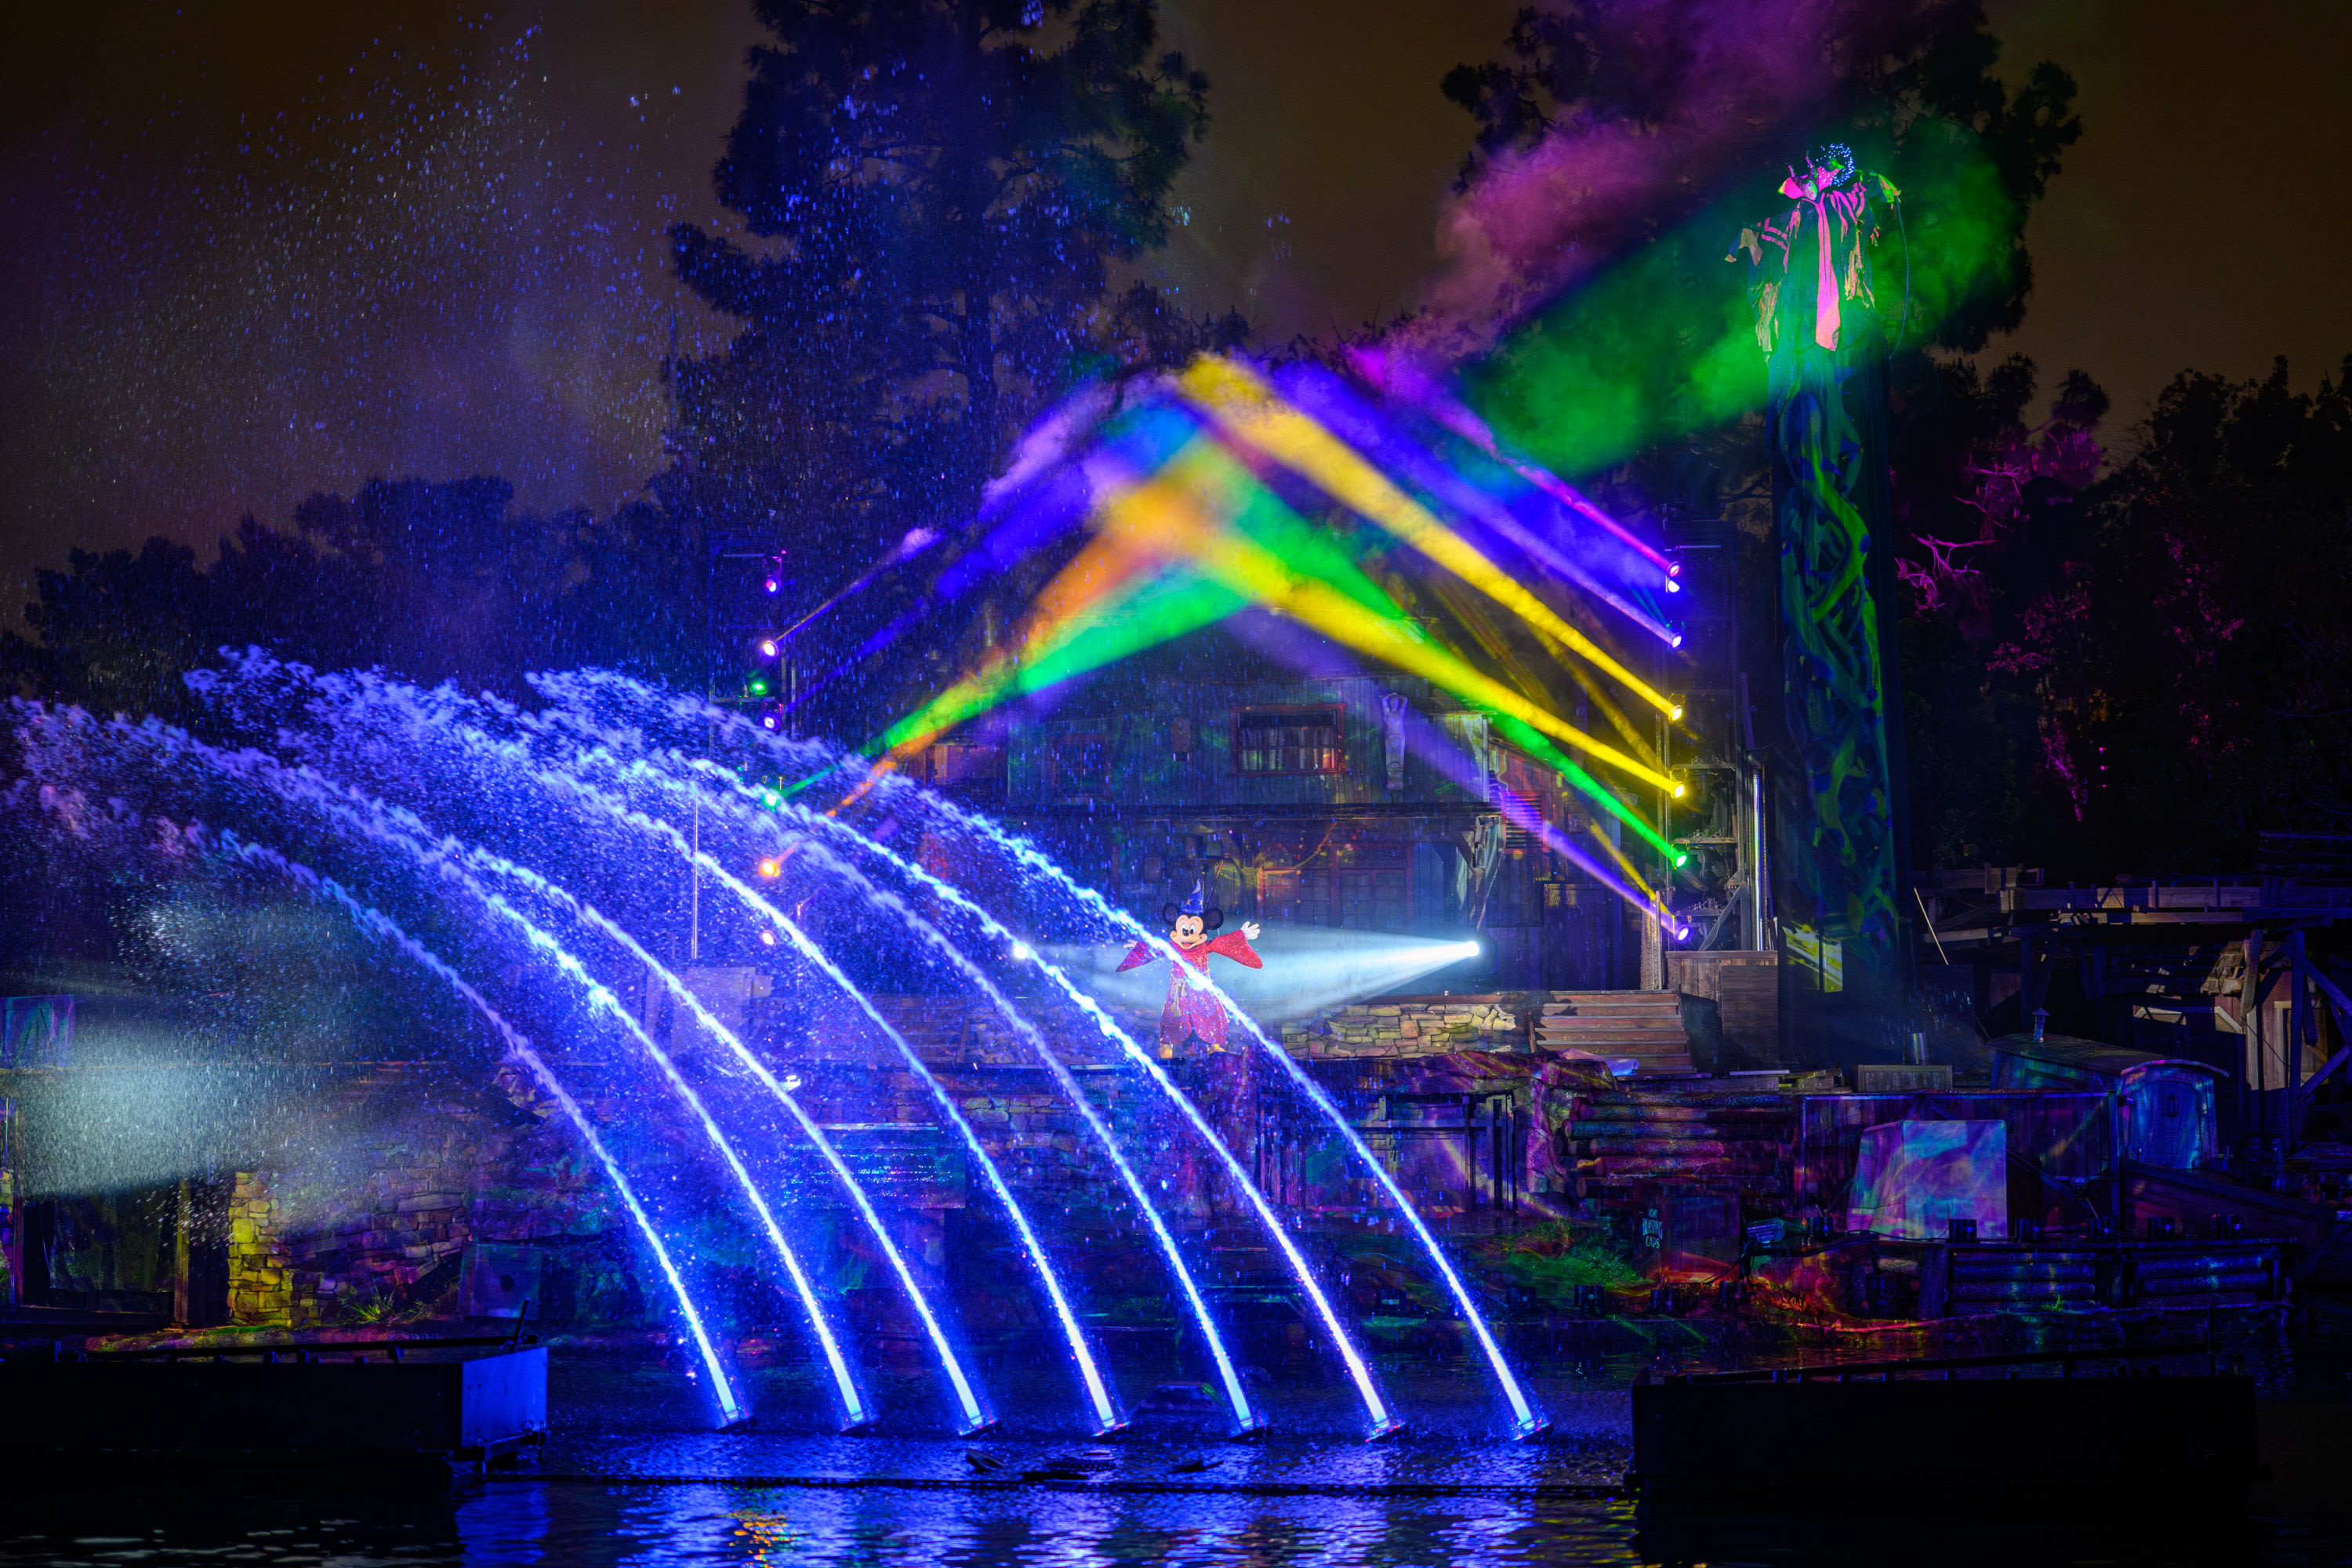 Disneyland's 'Fantasmic!' returns after fire — without a dragon. Here's a first look